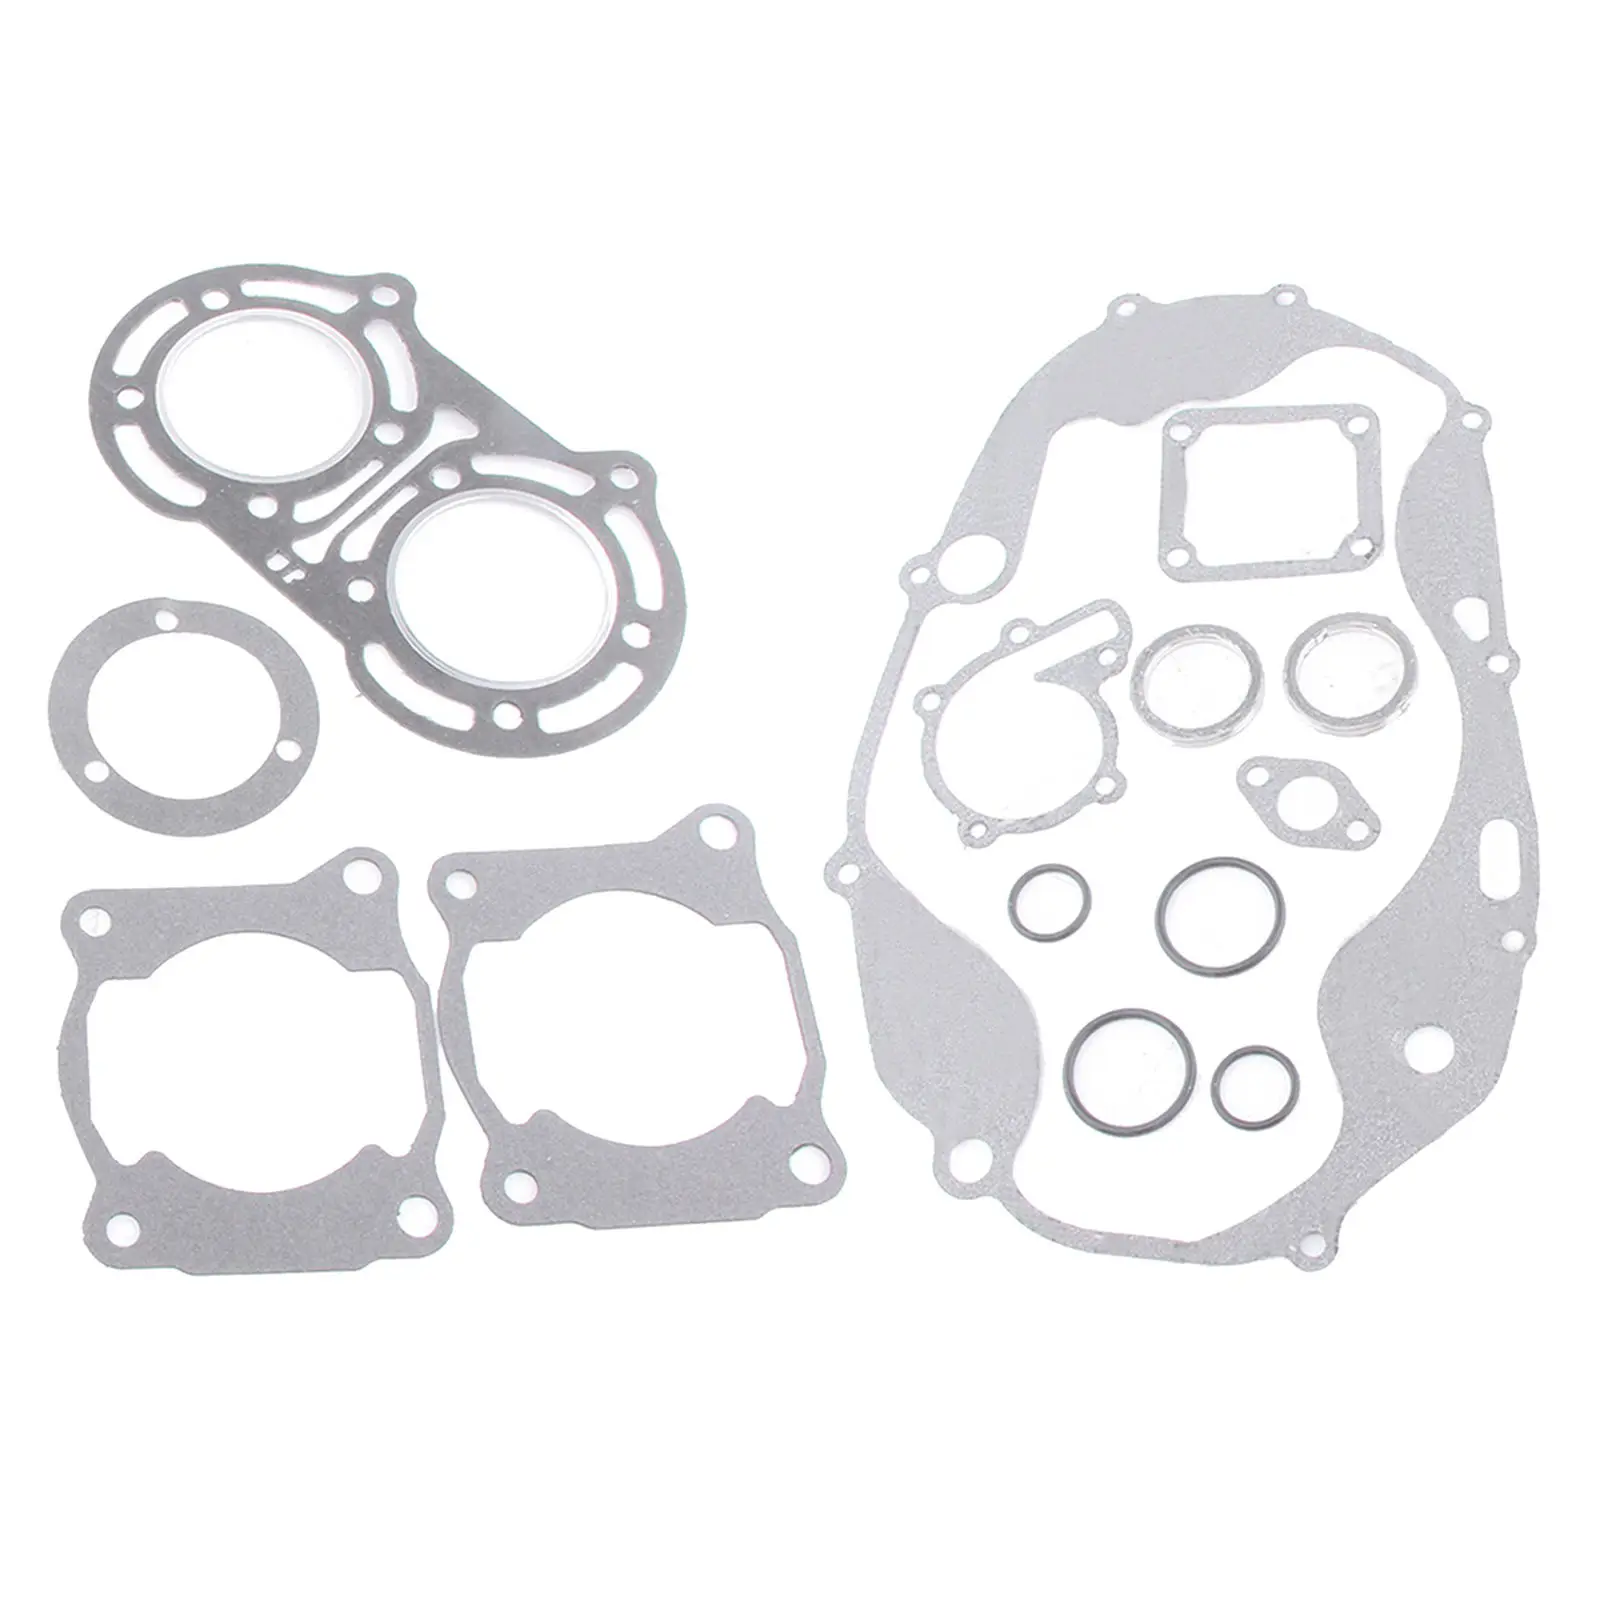 New Silver Replacement Complete Rebuild Engine Gasket Kit Full Set For Yamaha ATV YFZ350 Banshee 350 87-06 GS34